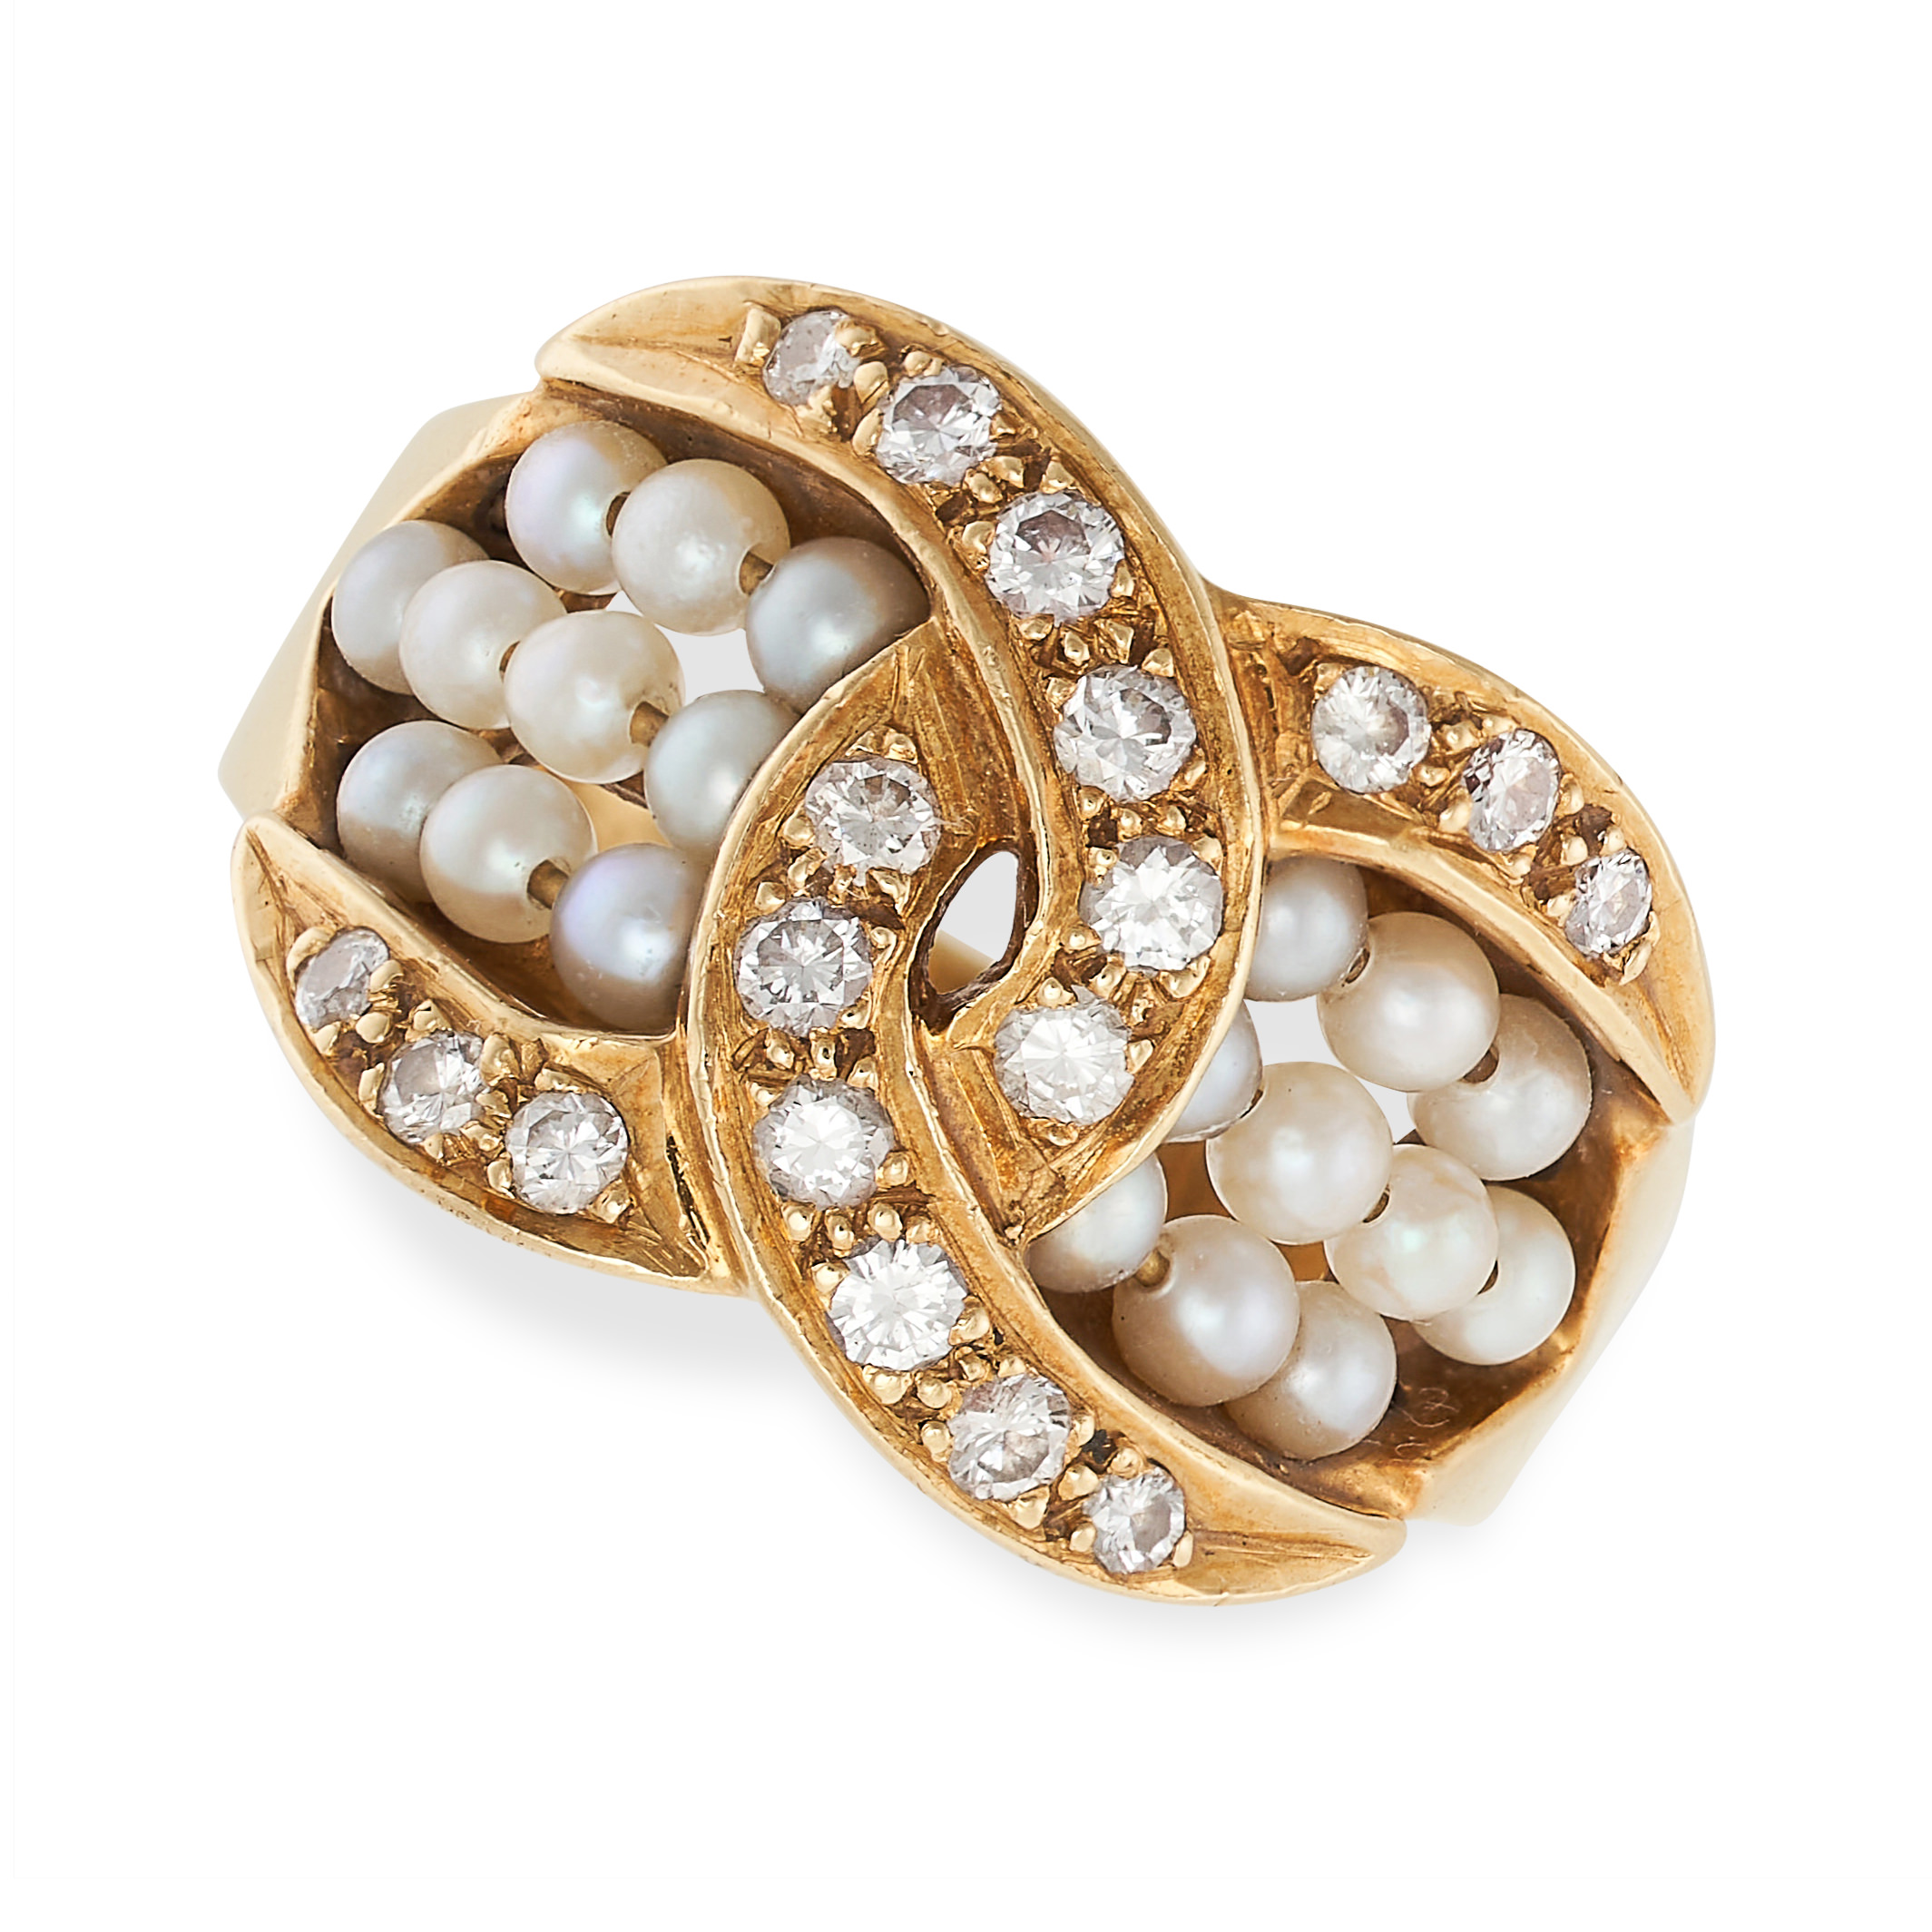 A VINTAGE FRENCH PEARL AND DIAMOND RING in 18ct yellow gold, comprising two interlocking C motifs